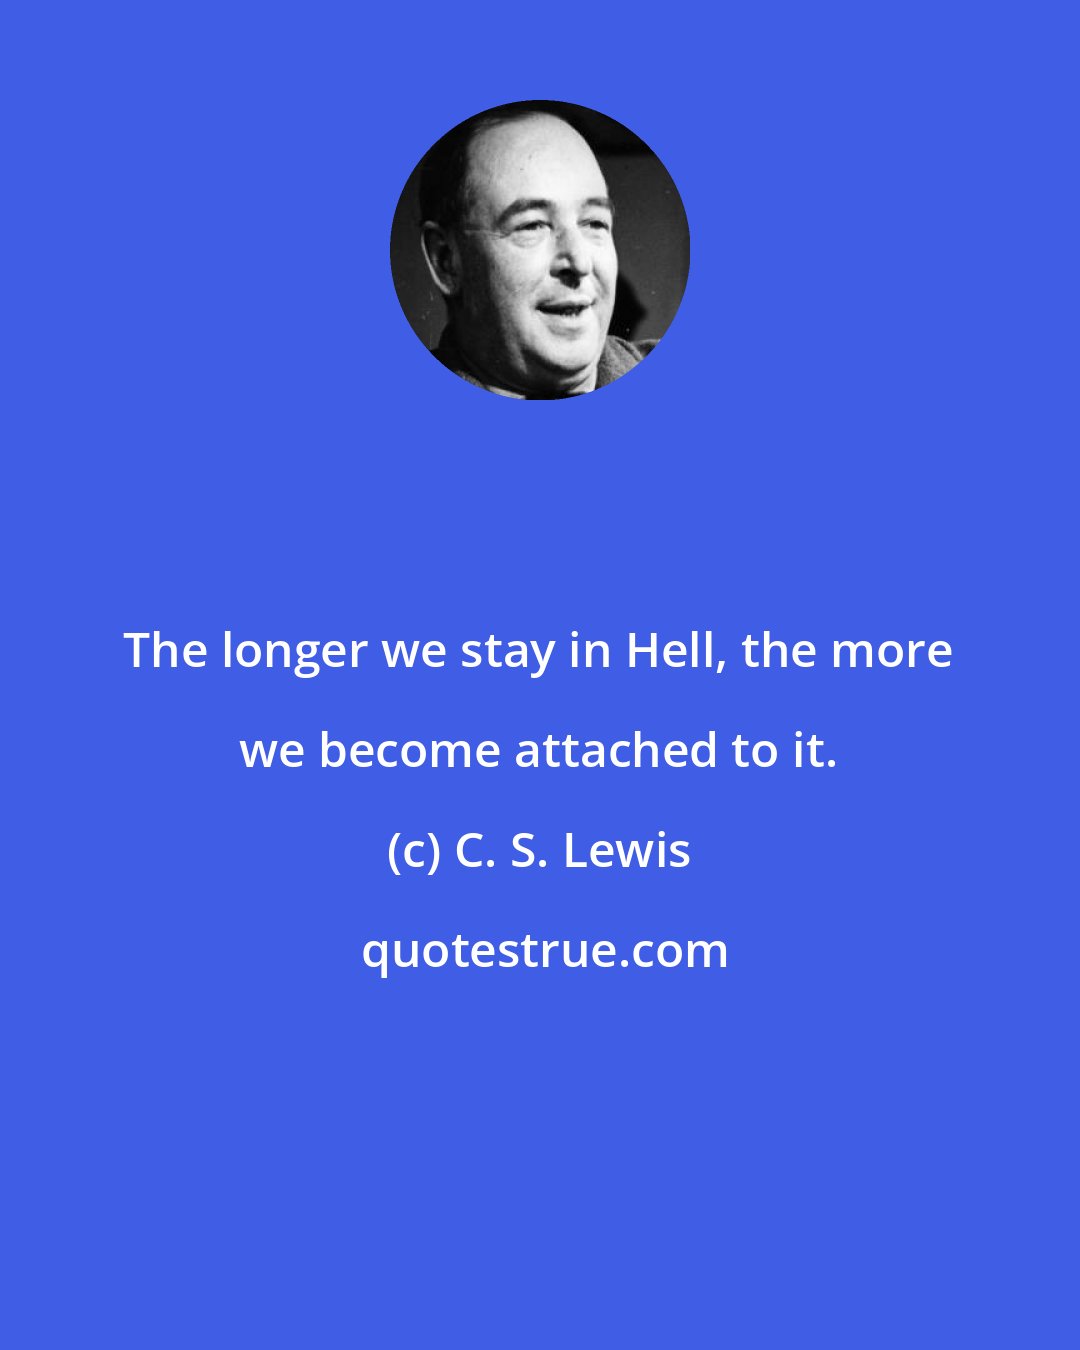 C. S. Lewis: The longer we stay in Hell, the more we become attached to it.